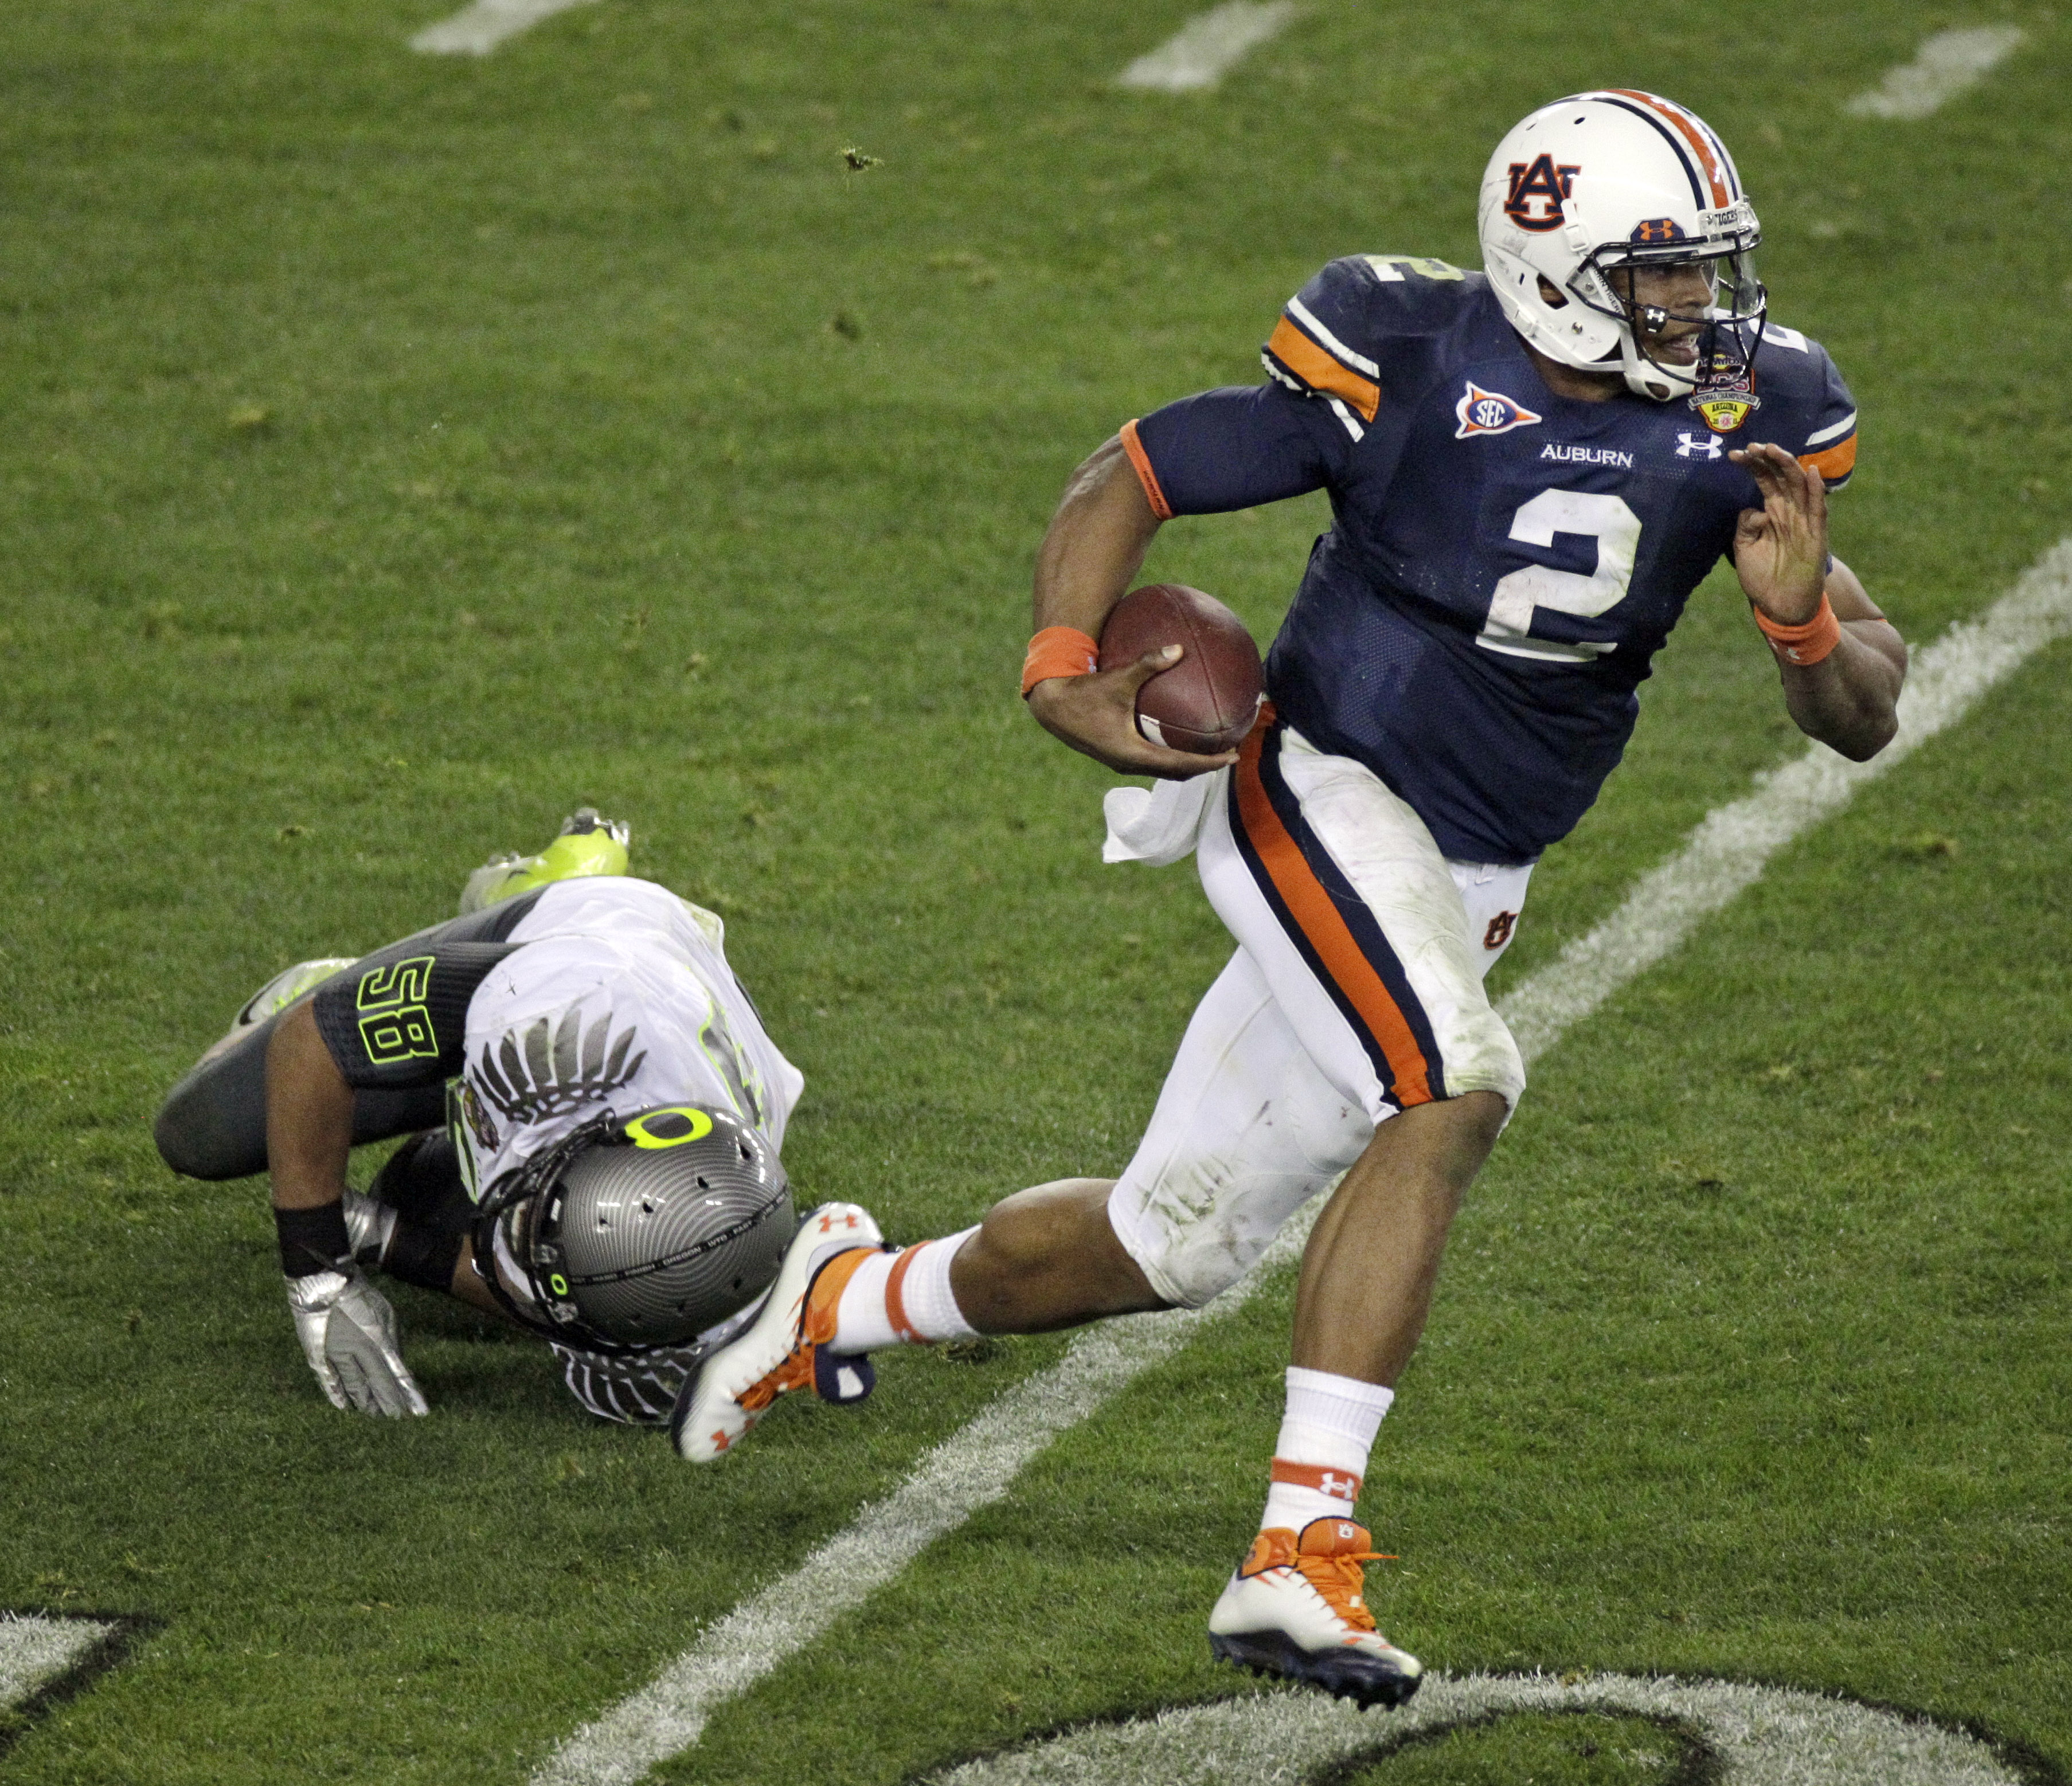 Oregon loses BCS title game to Auburn on final play